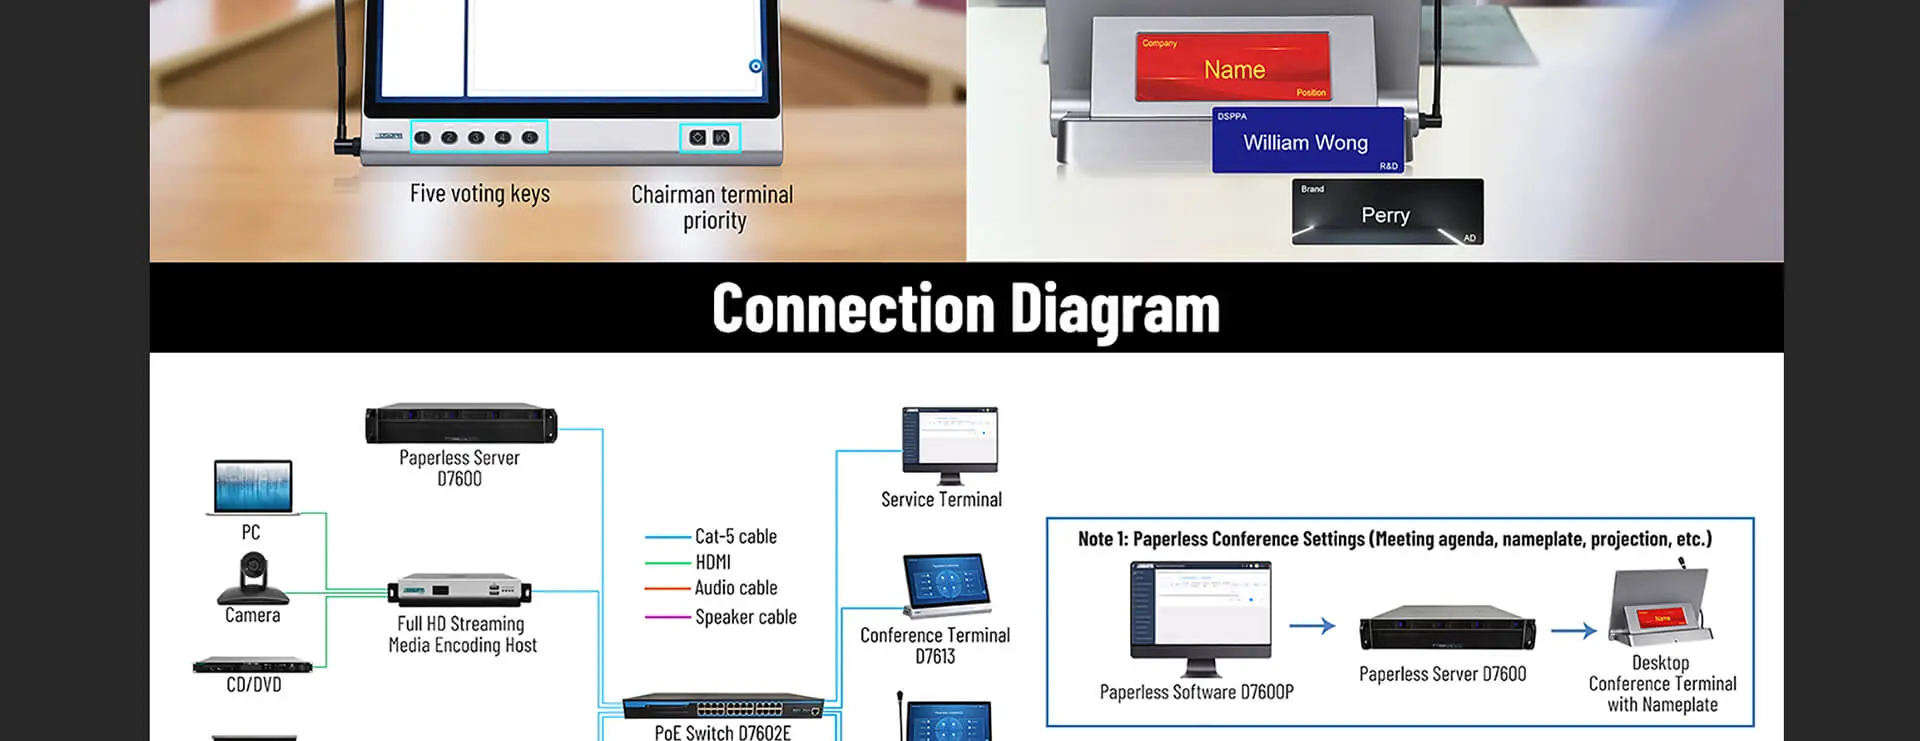 Desktop All-in-one Discussion Terminal na may Nameplate